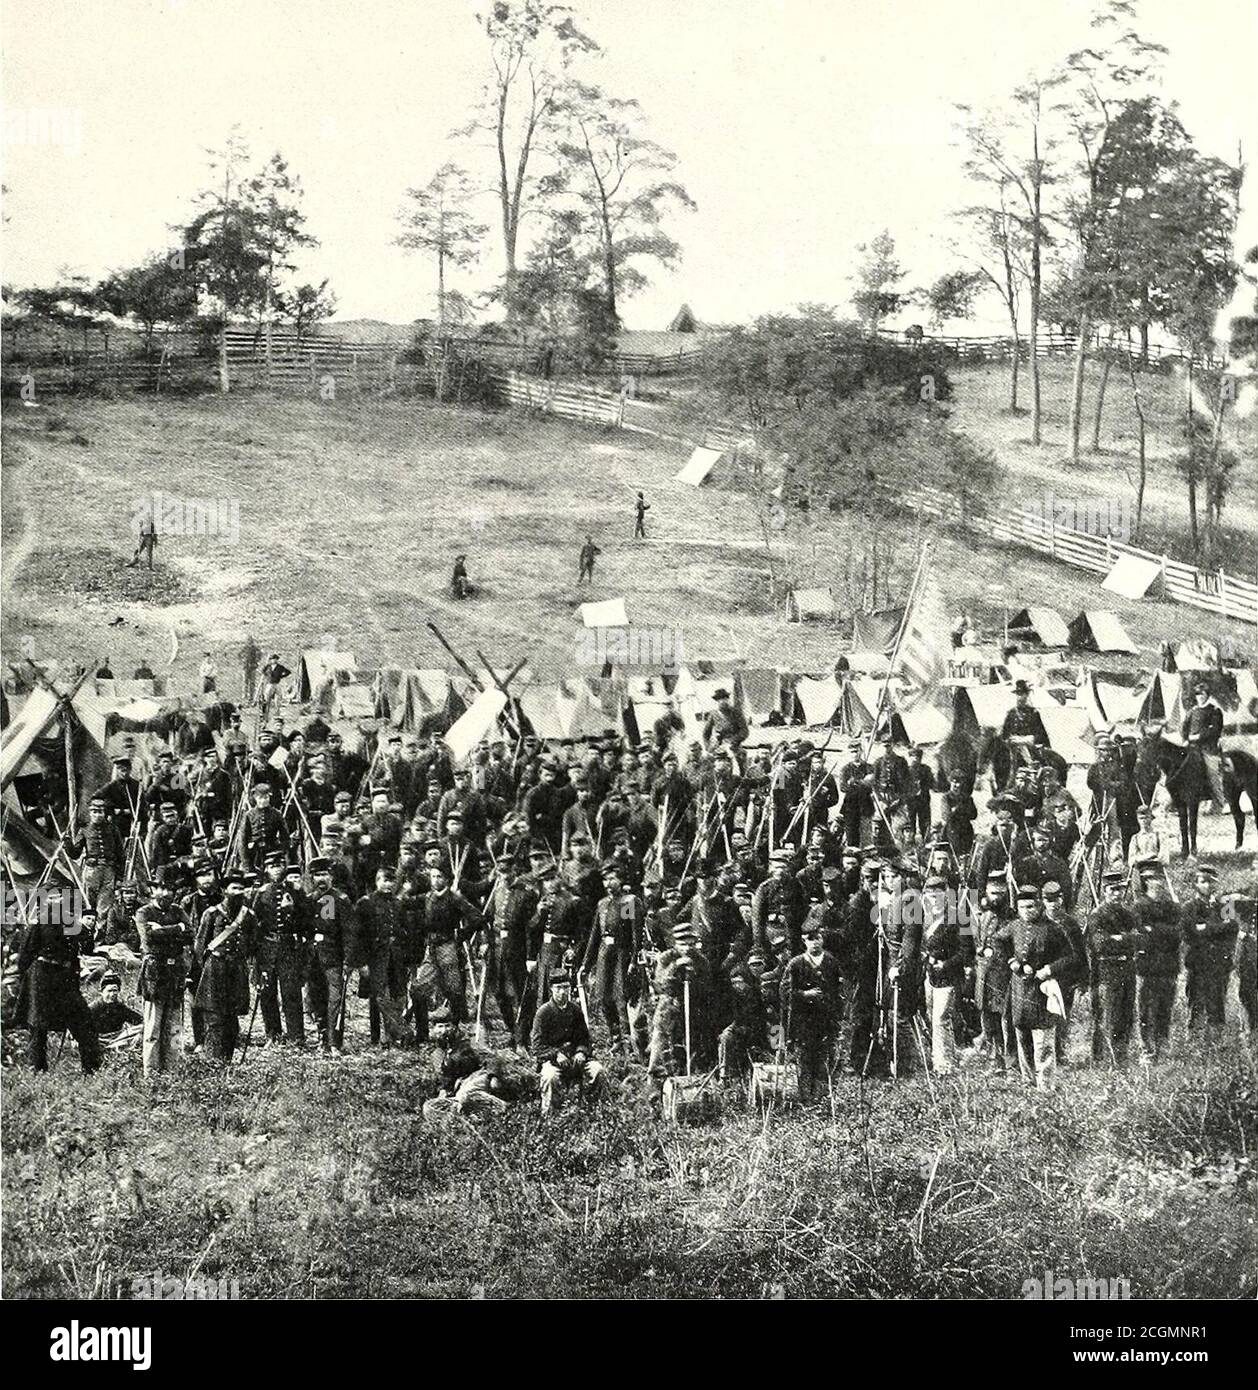 . The photographic history of the Civil War : in ten volumes . Copyright by Patriot Fuh. Cc OUR CITIZEN SOLDIERS This informal photograph of the Ninety-Third New York Infantry was taken in 18fi2 jnst licfore Antictani.In it we see the quahty of the men who dropped the ])nrsnits of civil life and flocked to form the armies ofthe North. Thus, in camp and on the battlefield the camera did its work and now takes us back over thefour terrible years, showing us to the minutest detail how our men marched and lived and fought. Theyouth of the troops is strikingly evident in this picture as they stand Stock Photo